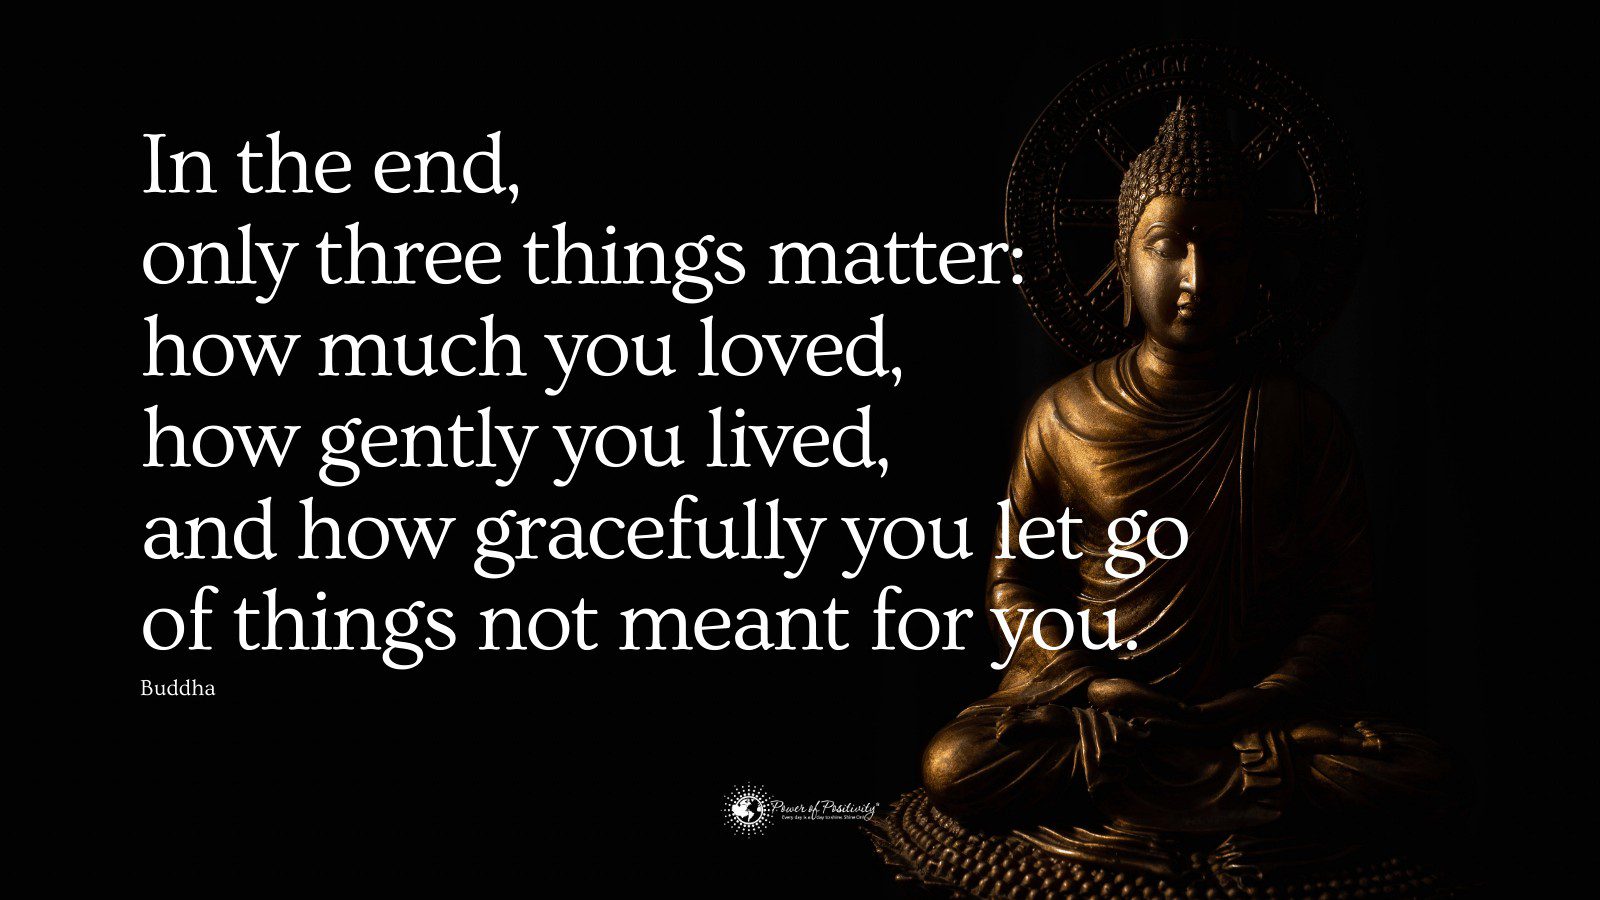 15 Wise Quotes About Life and Love from Buddha